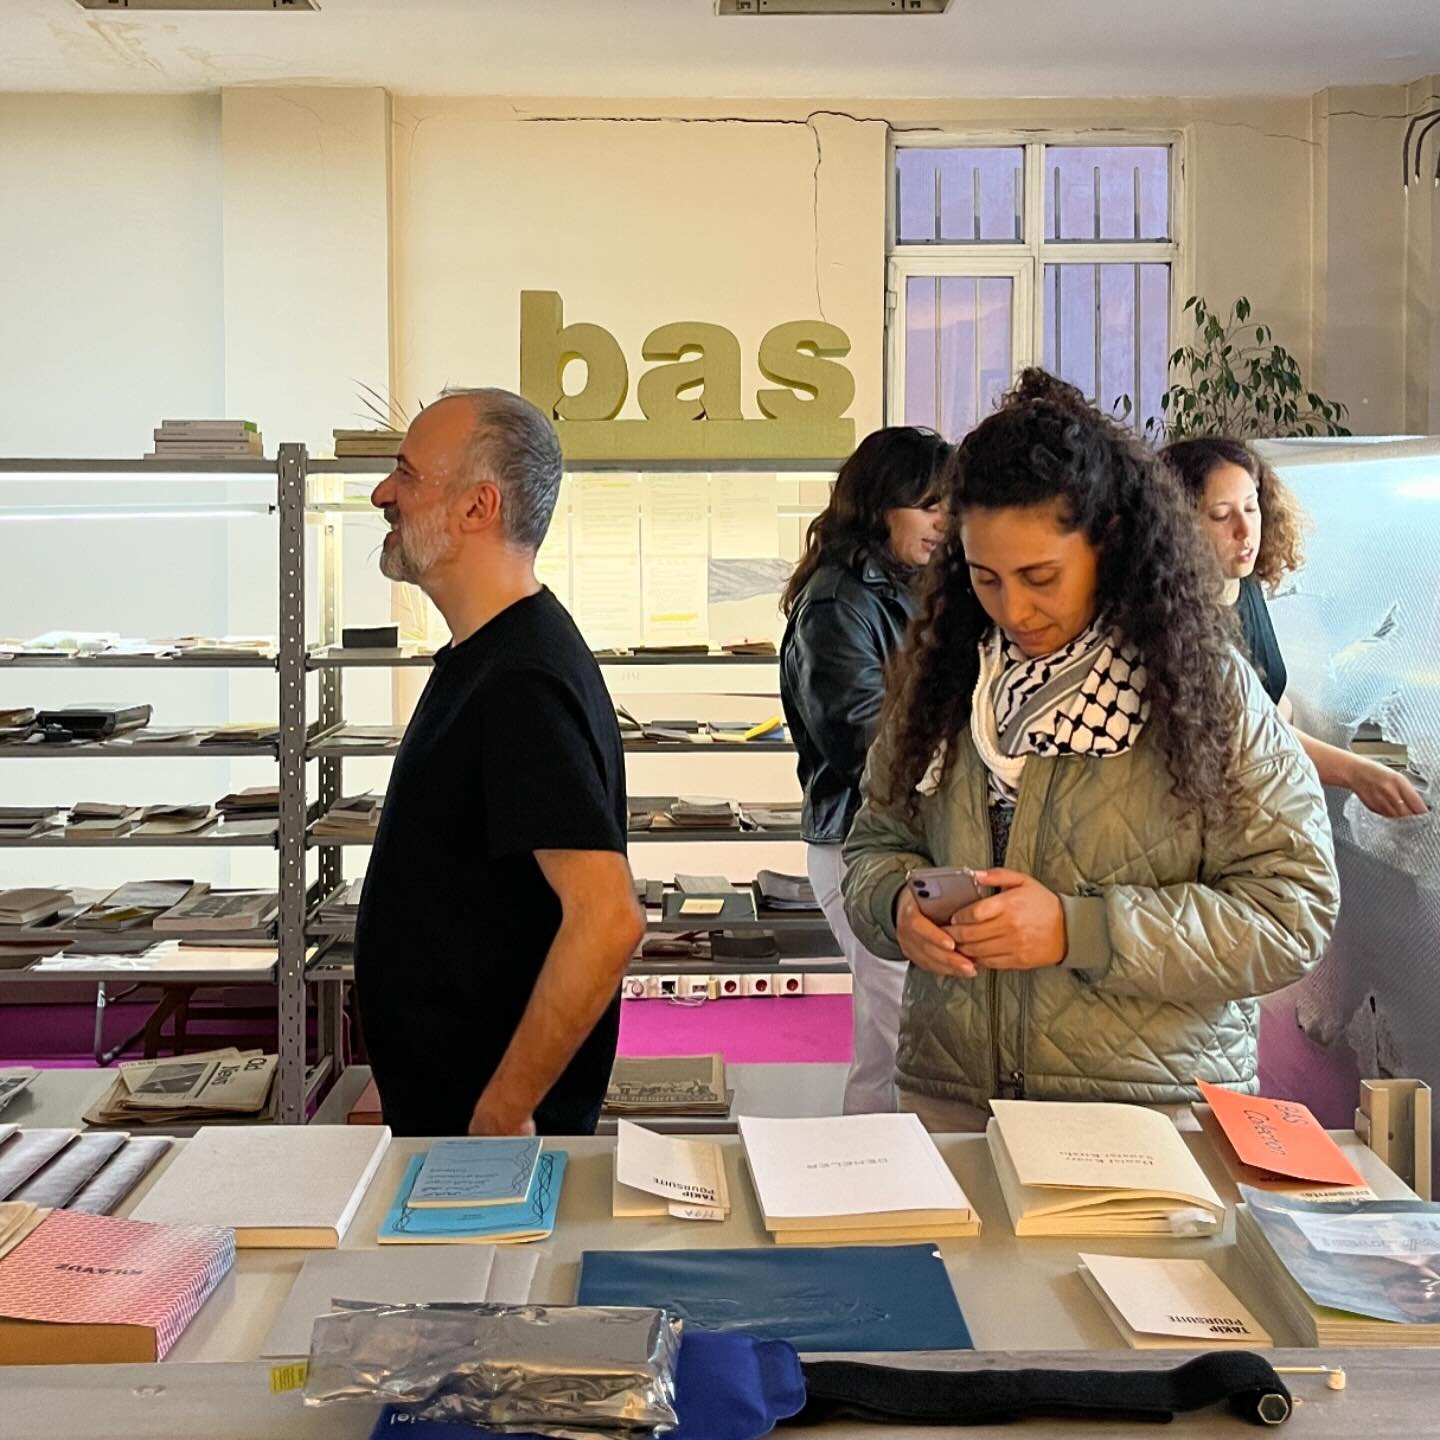 We visited BAS after day two @border_lessartbookdays with @cairoartbookfair and their friends.
Thank you for inviting us, Asli and Banou, to look around the inventory of artists&rsquo; books.

BAS is an artist-run space in Istanbul with an inspiring 